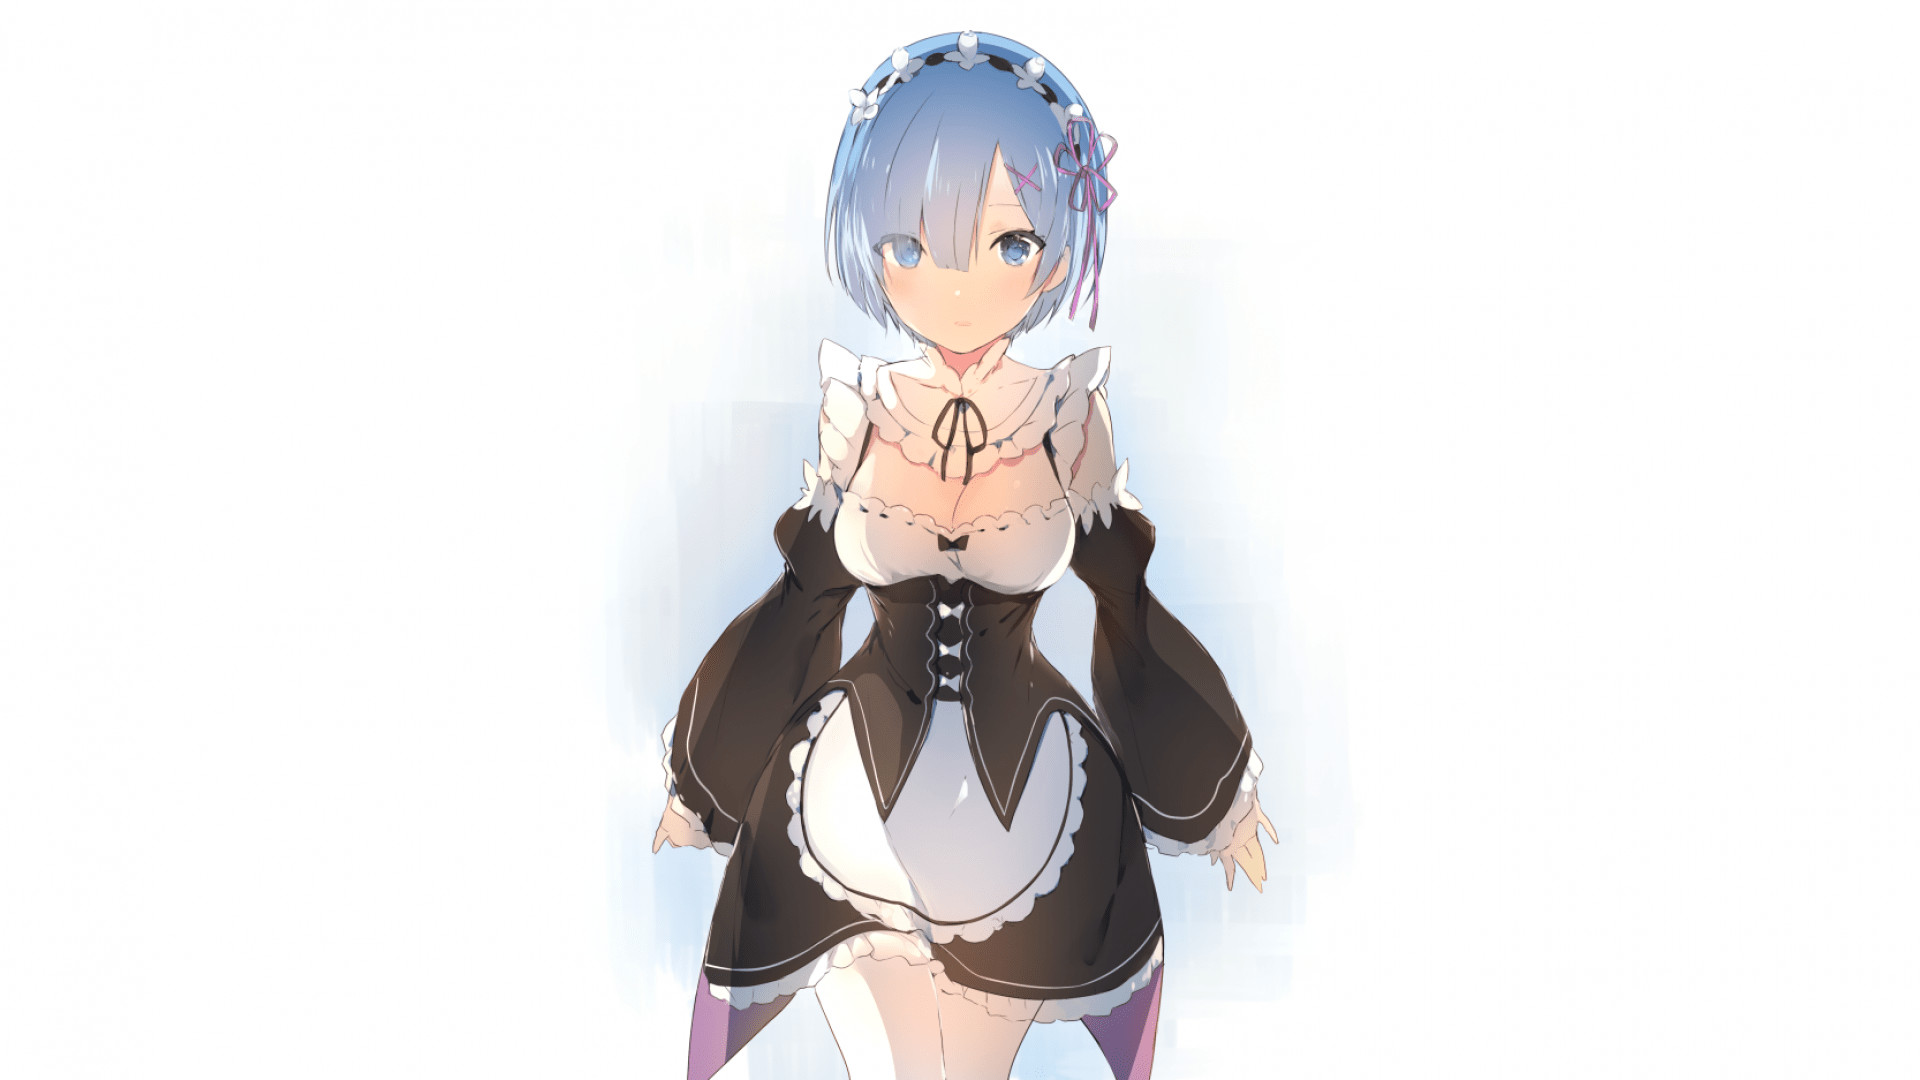 1920x1080 Re Zero Rem Standing Maid Outfit Short Hair Wallpaper - Image #3979 -